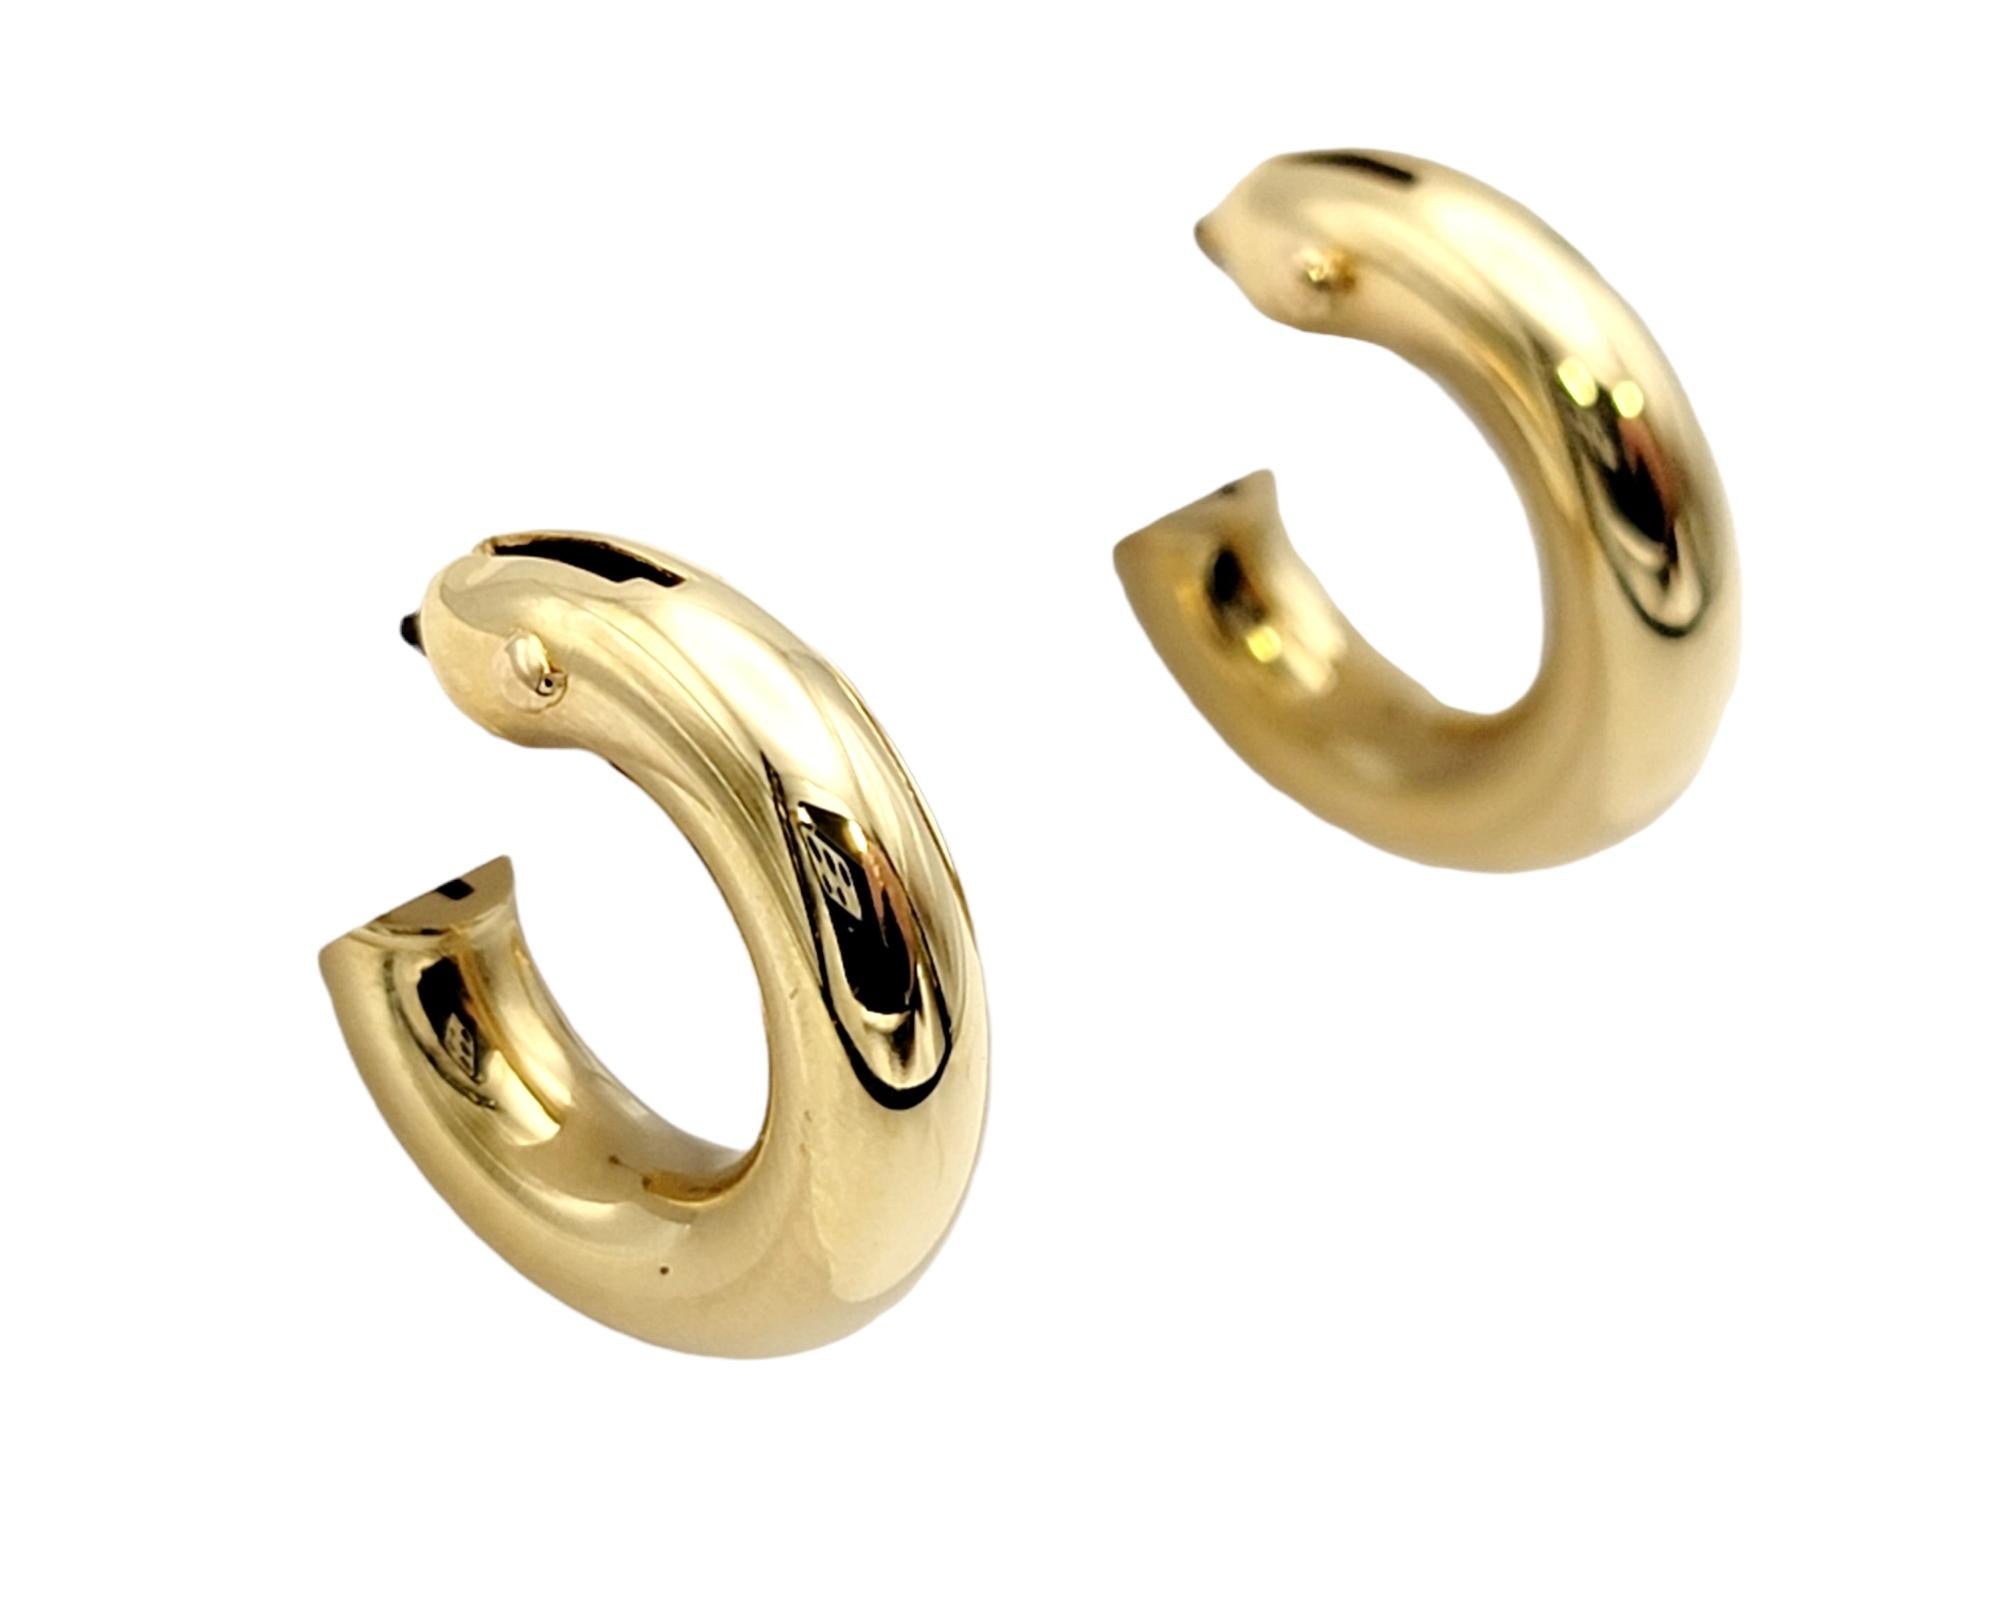 These simple yet elegant Roberto Coin hoop earrings are classic in style, can be dressed up or down, and coordinate with just about everything, making them a perfect everyday piece. We will include the original Roberto Coin satin travel pouch.